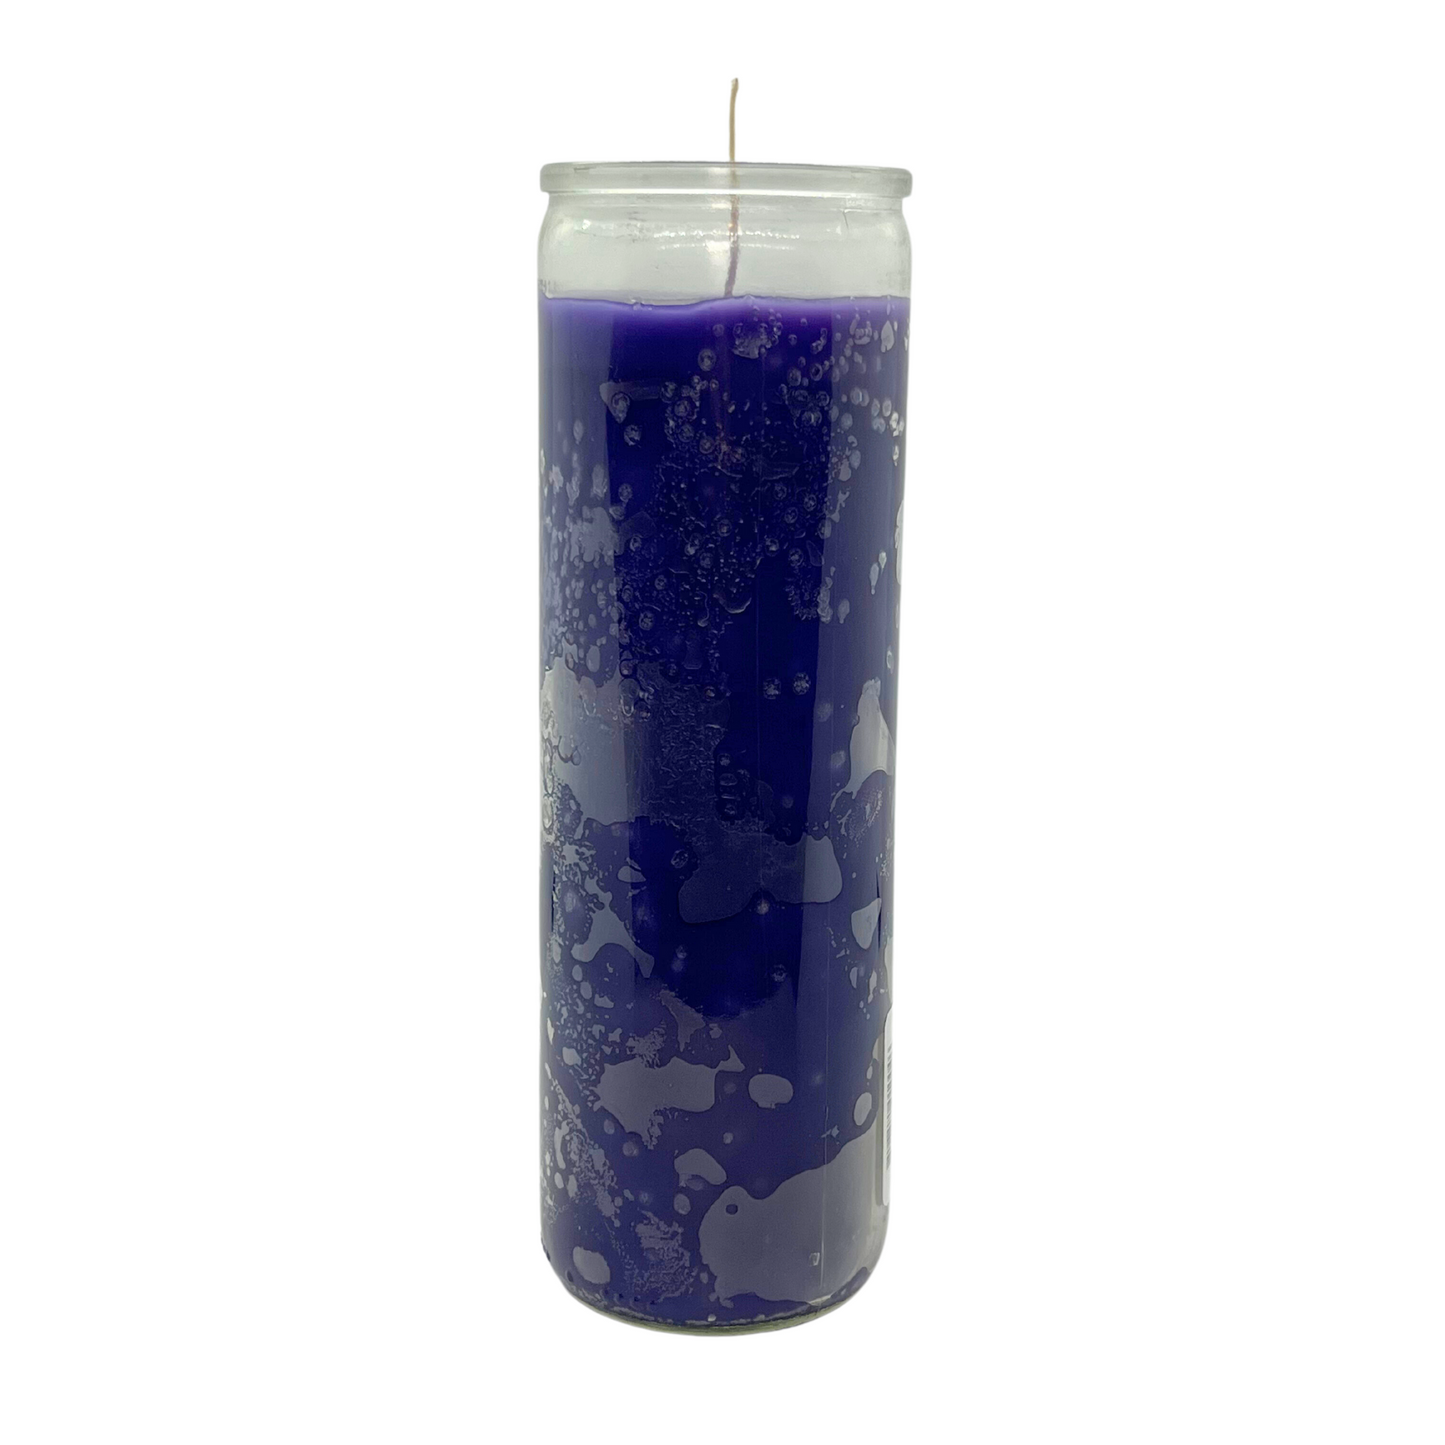 Purple 7 Day Candle